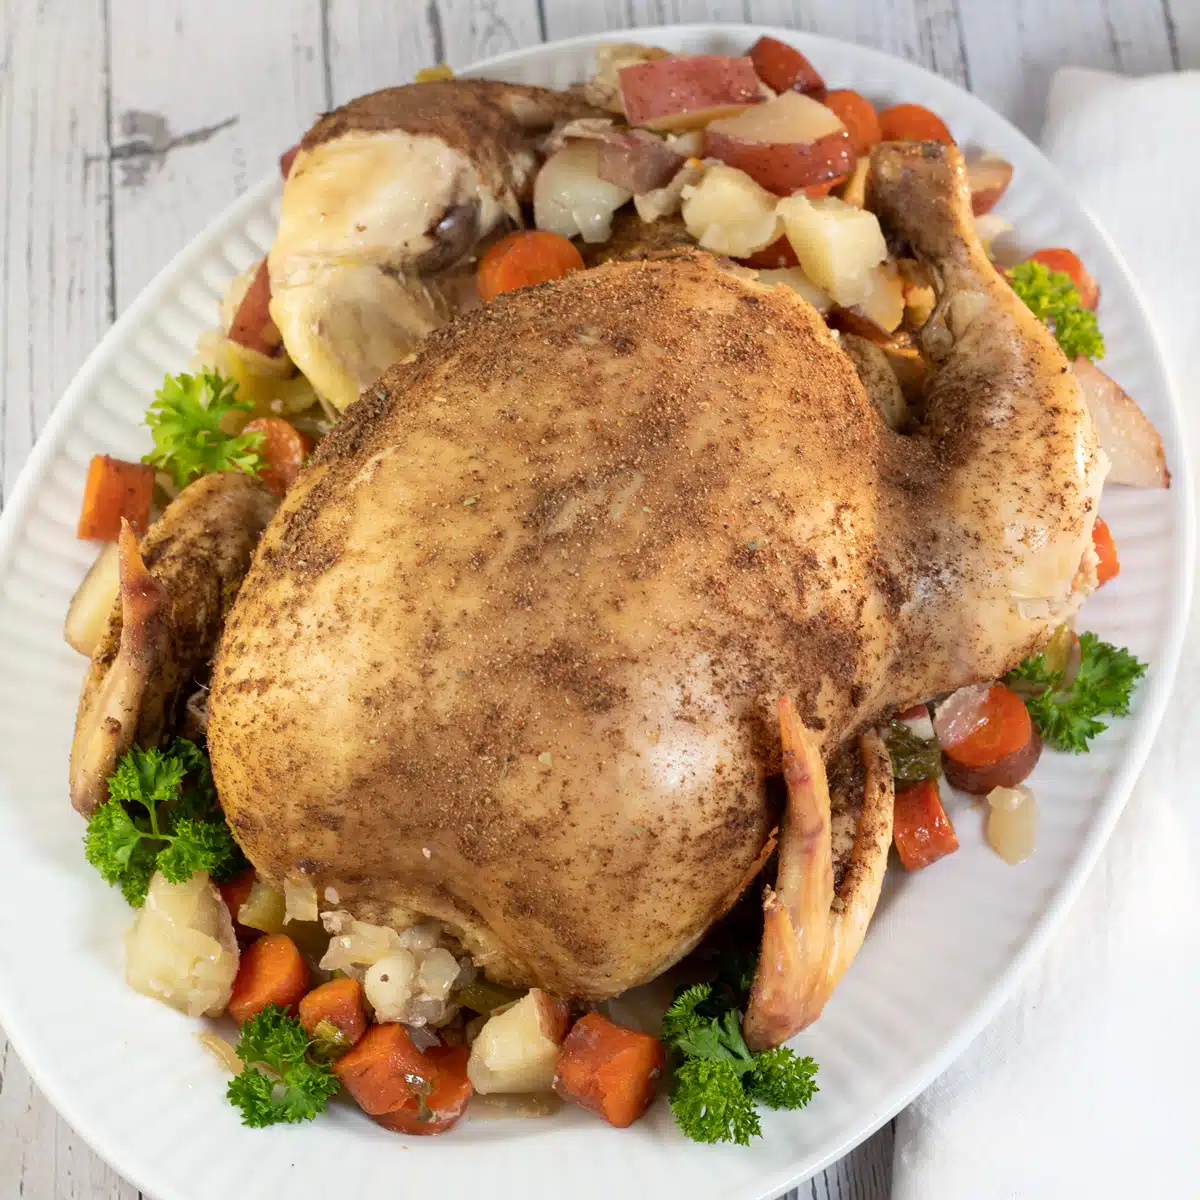 Square image showing a crockpot cooked whole chicken on a serving platter with mixed veggies.